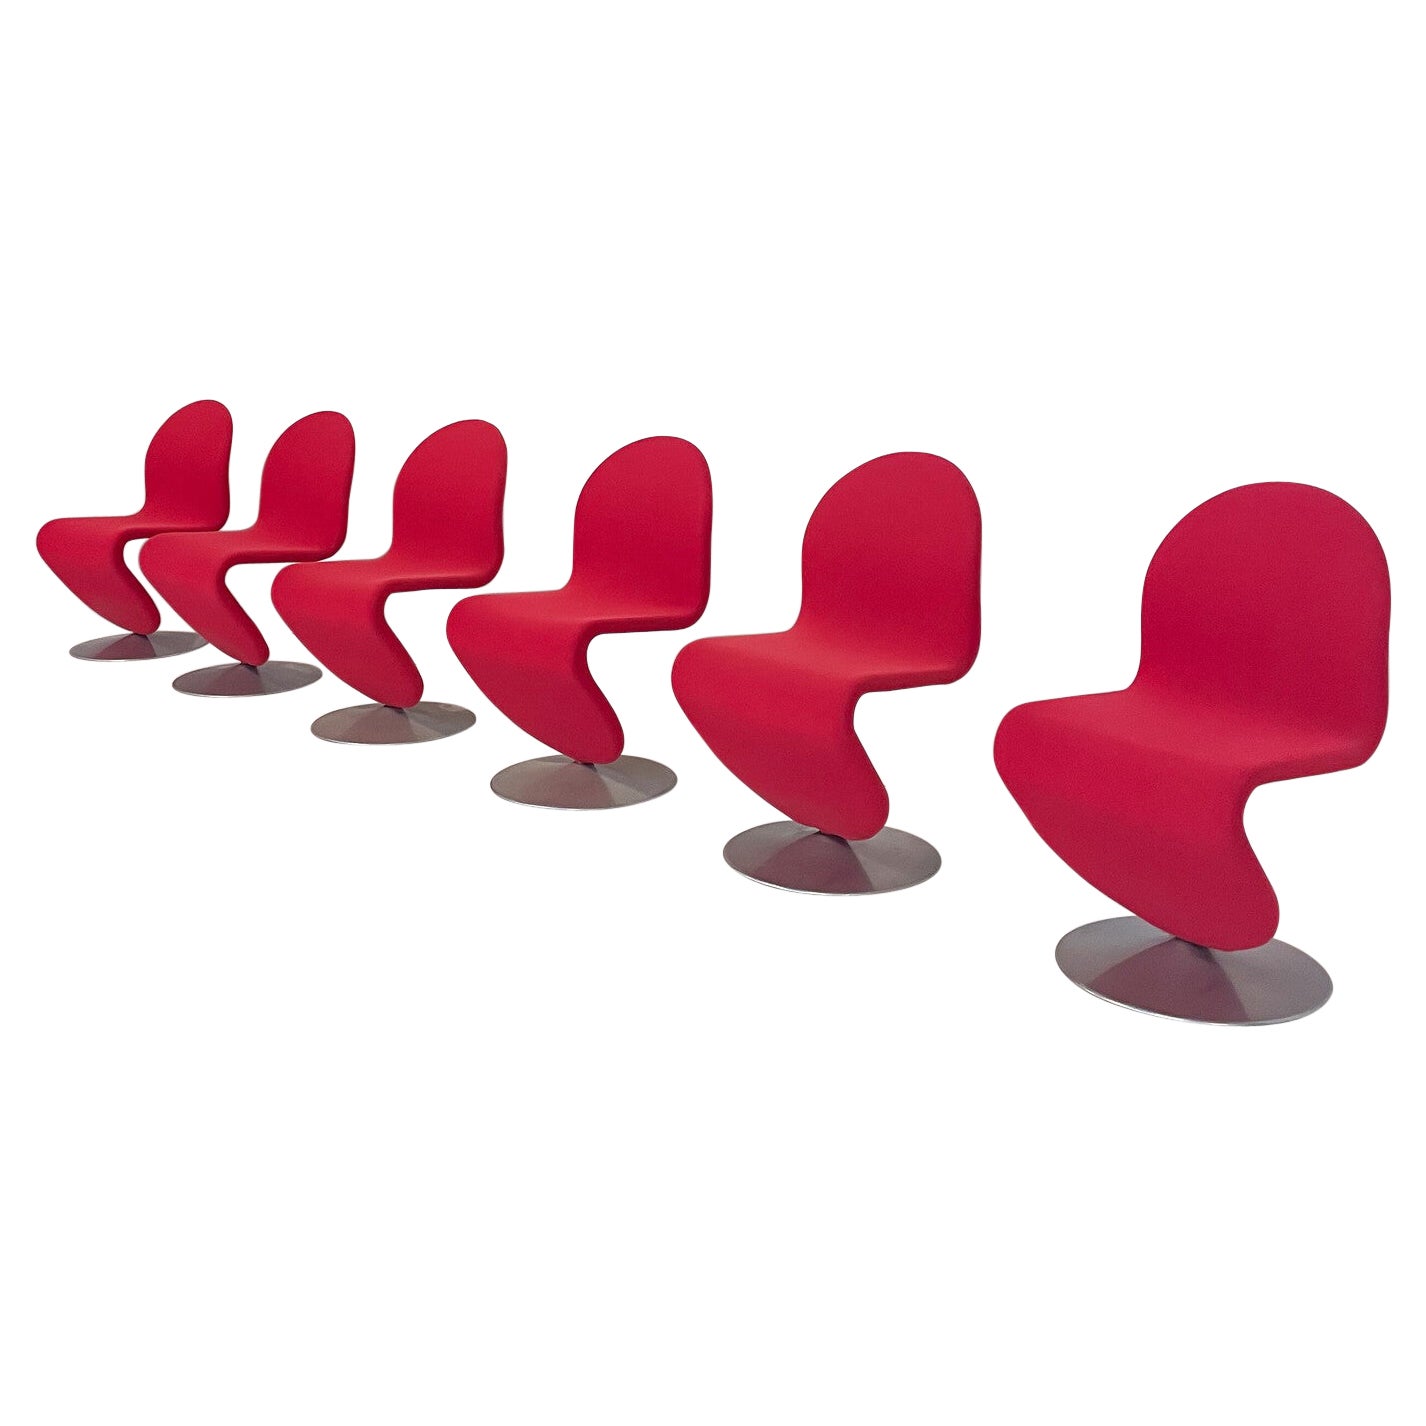 Mid-Century Modern Set of 6 Red System 123 Chairs by Verner Panton, 1973 For Sale